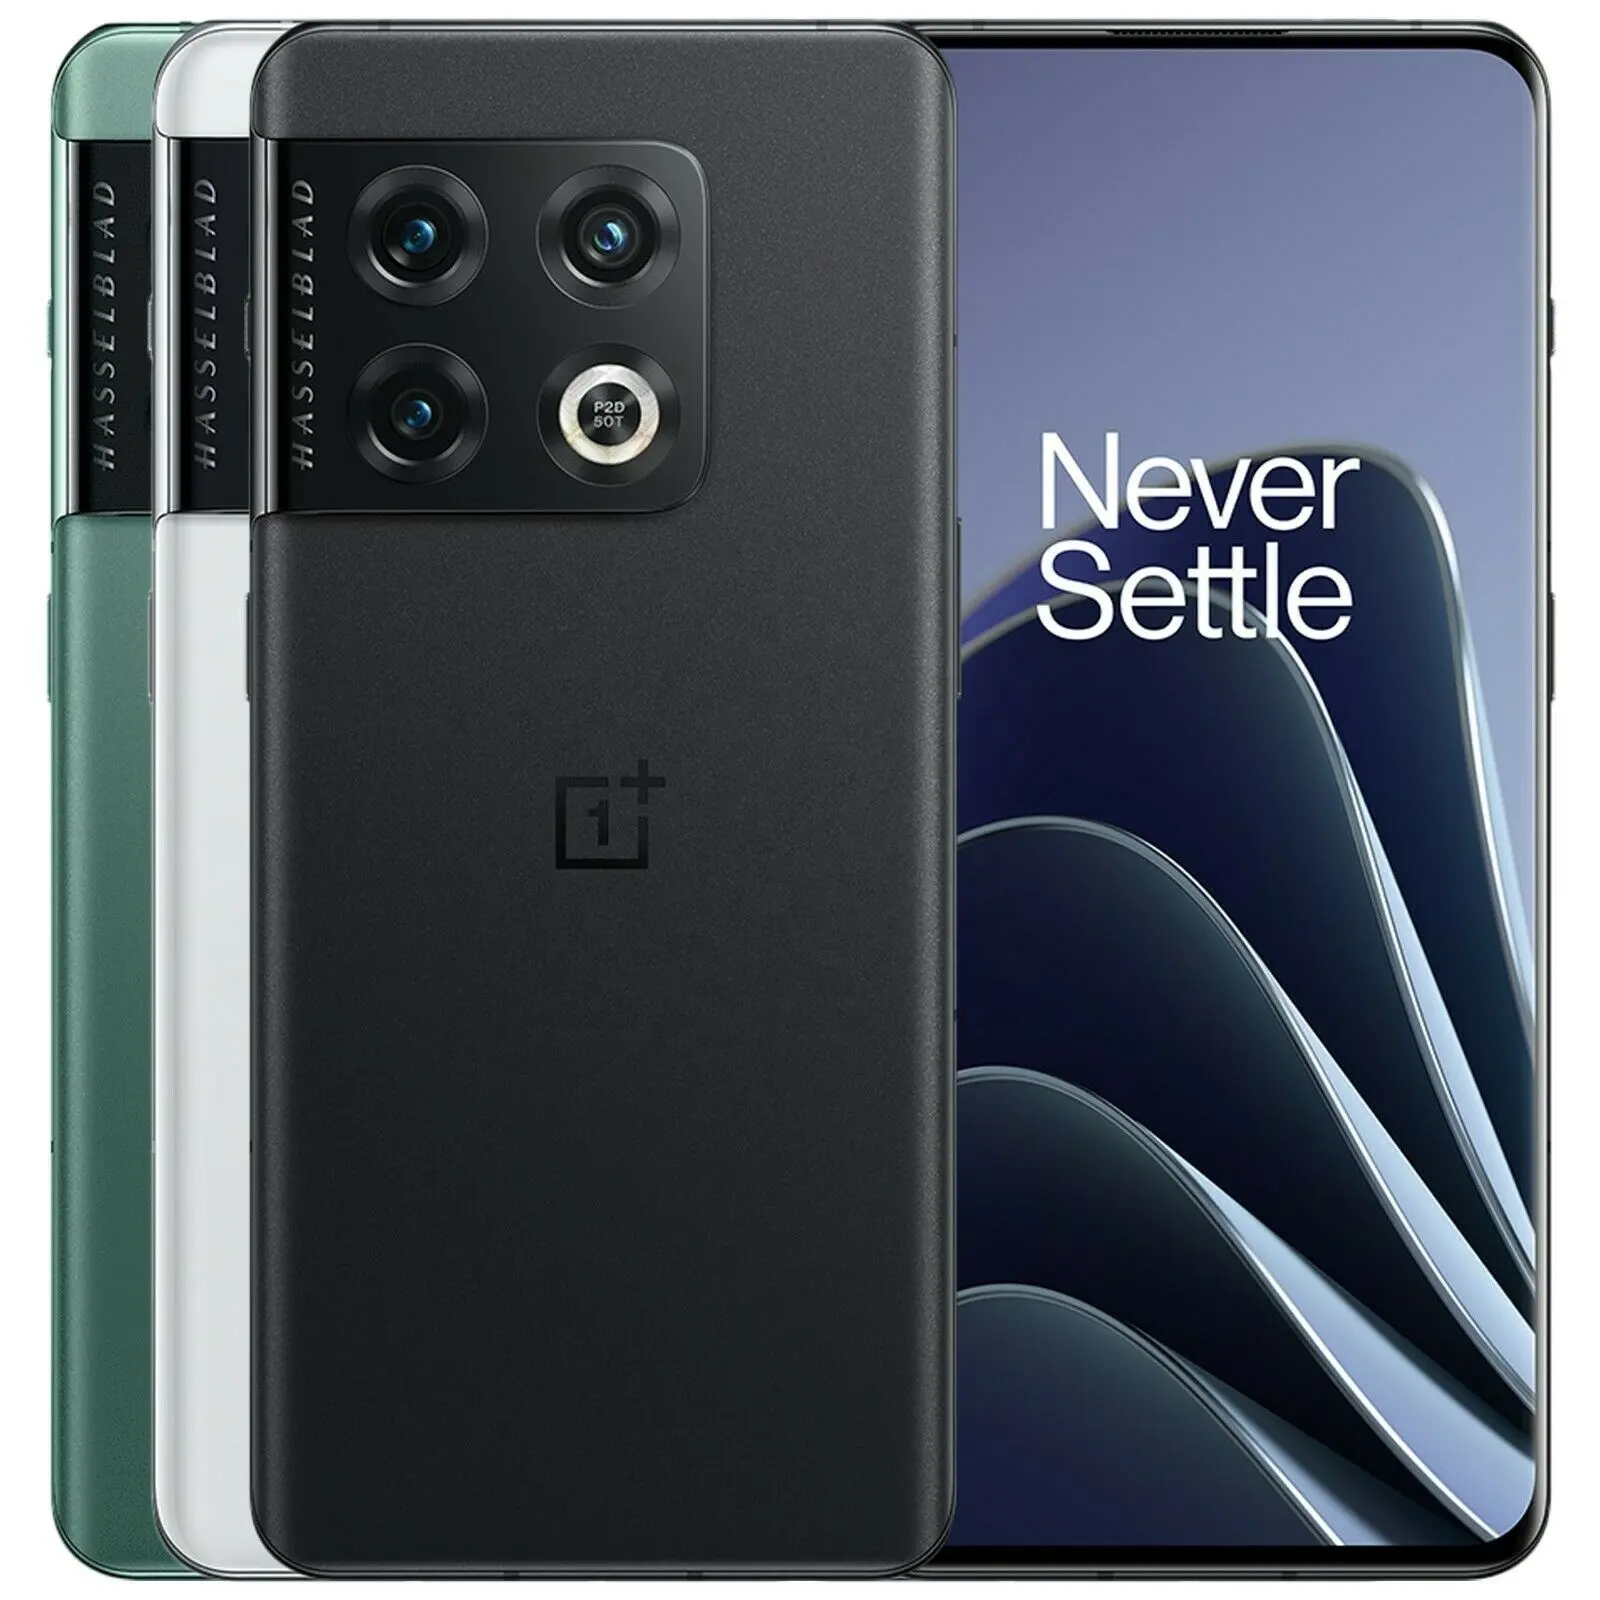 New Arrival OnePlus 10 Pro 5G 6.7" 120Hz 8Gen1 50MP 5000mAh by FedEx Unlocked Triple Camera co-Developed with Hasselblad